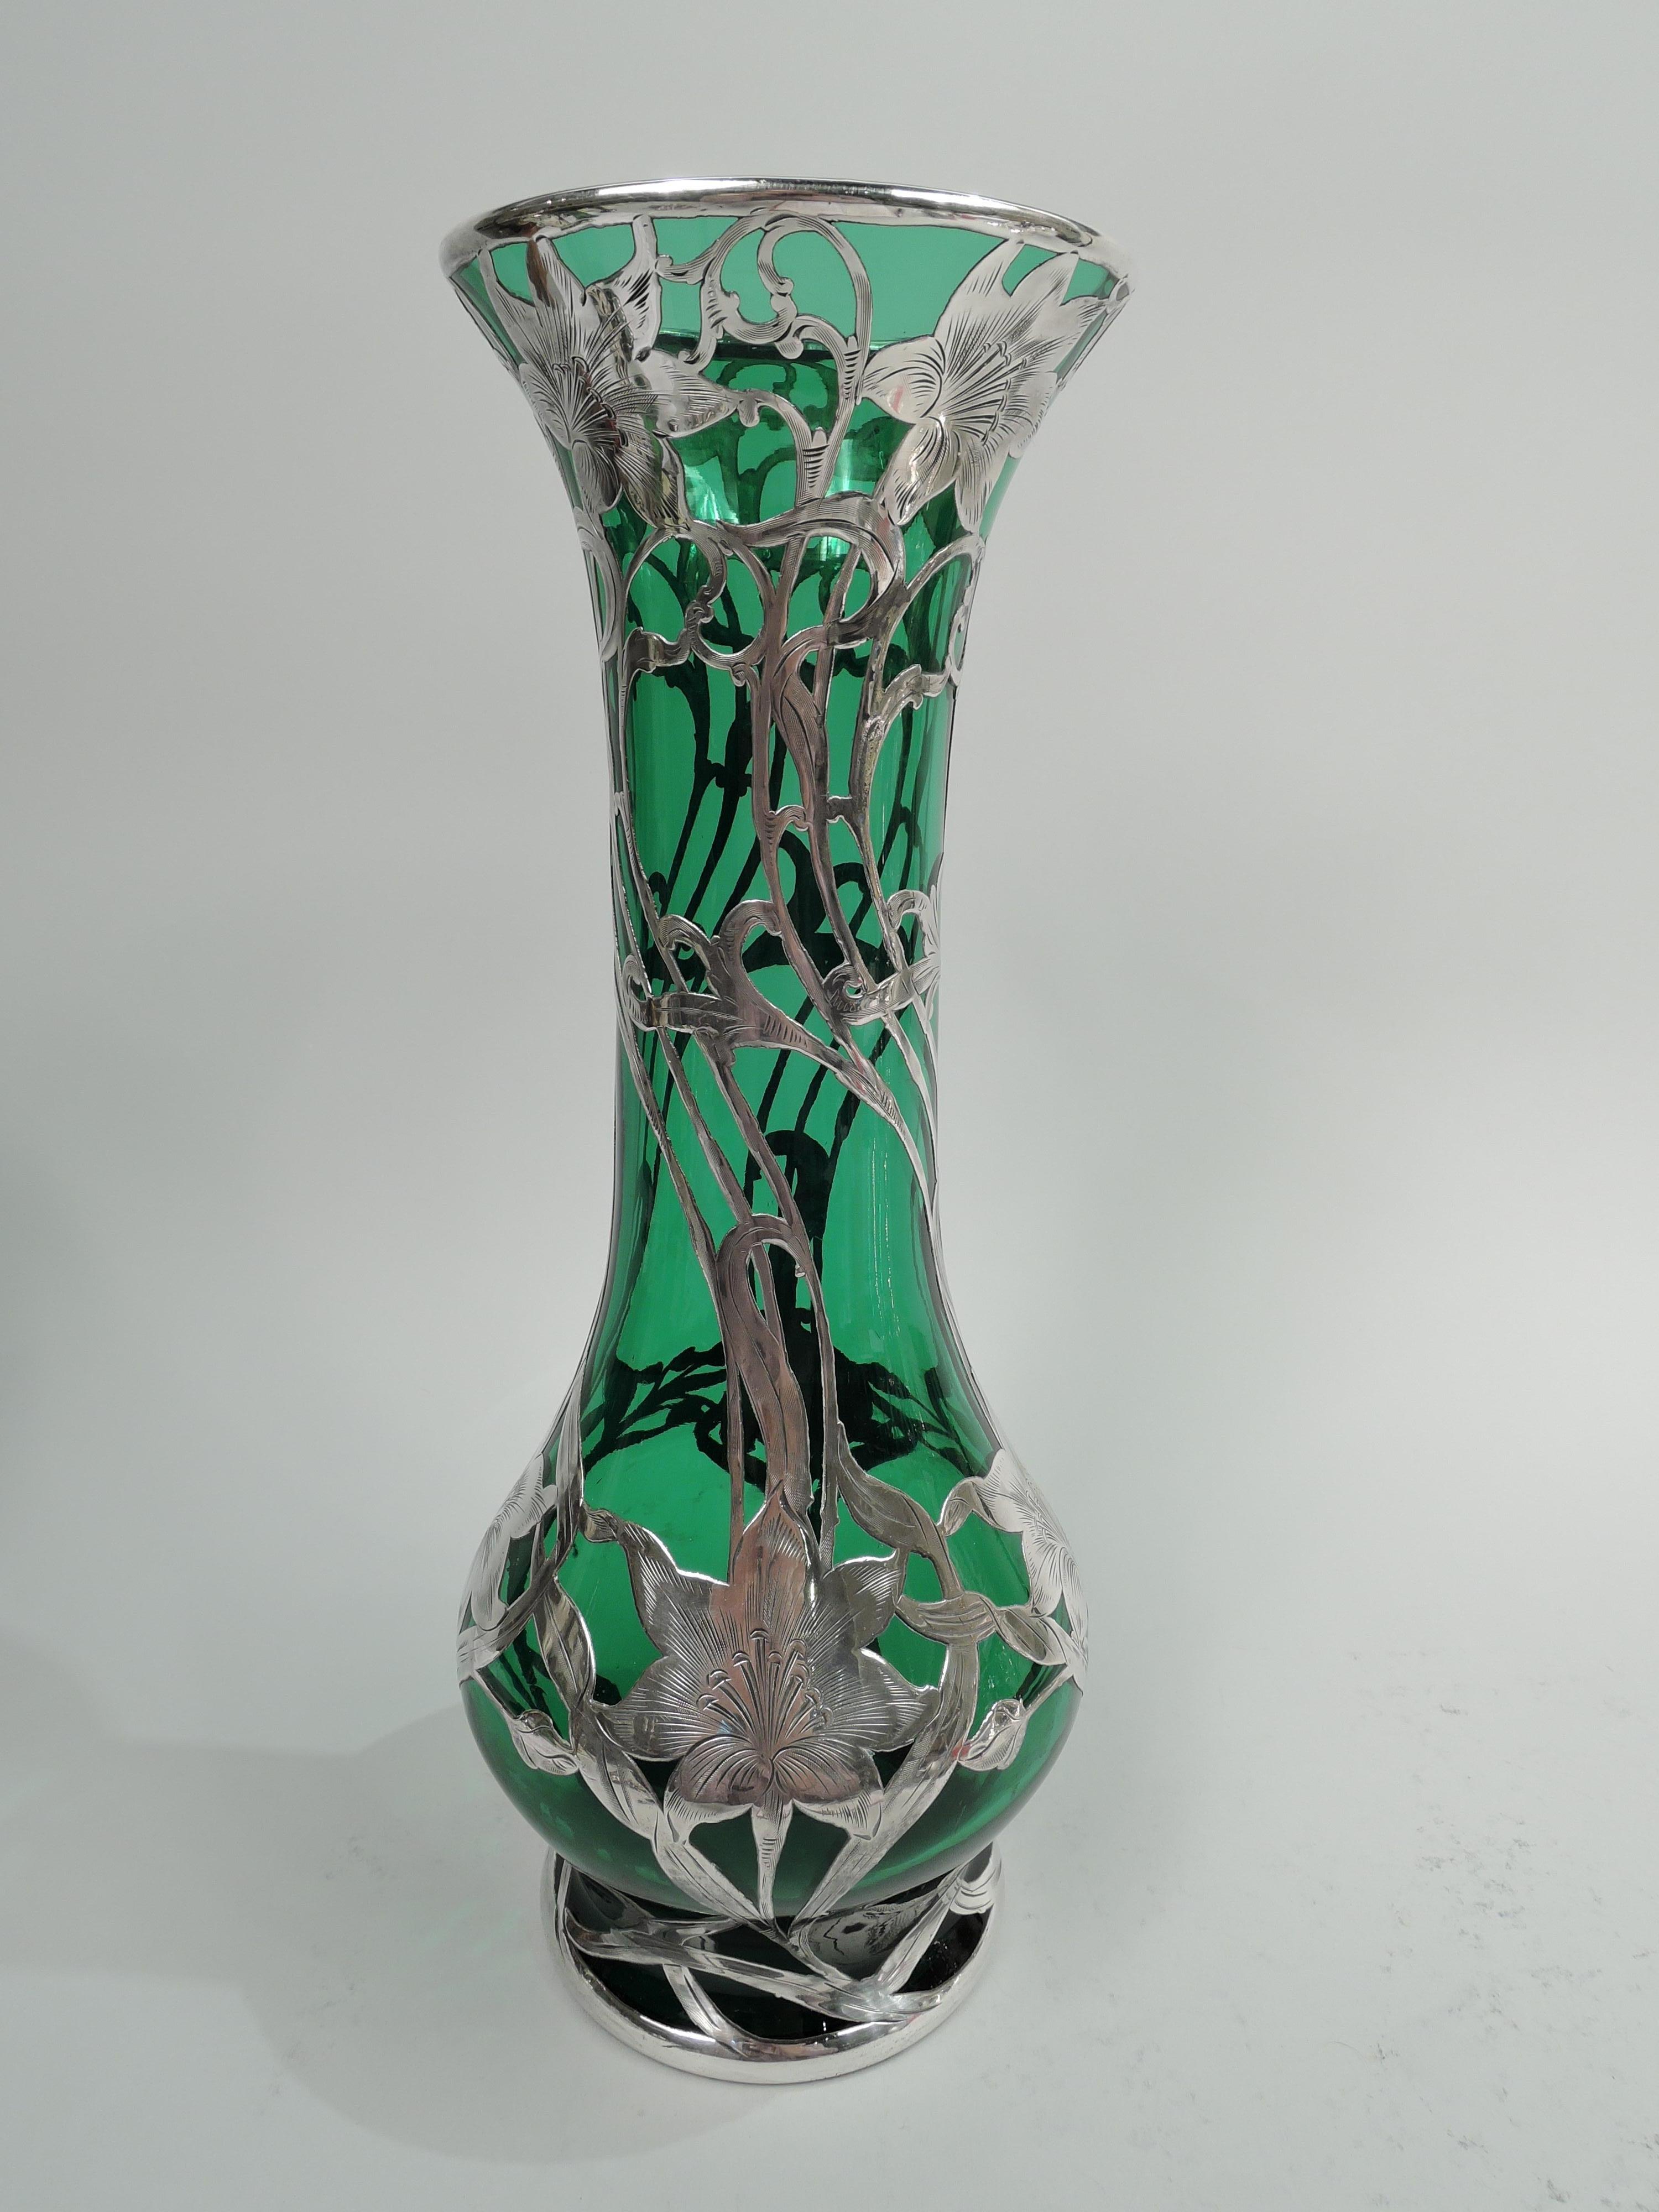 Turn-of-the-century Art Nouveau glass vase with engraved silver overlay. Made by Alvin Corporation in Providence. Tall baluster with flared rim and short foot. Overlay in form twisted tendrils entwined and overlaid with flower heads. Glass is green.